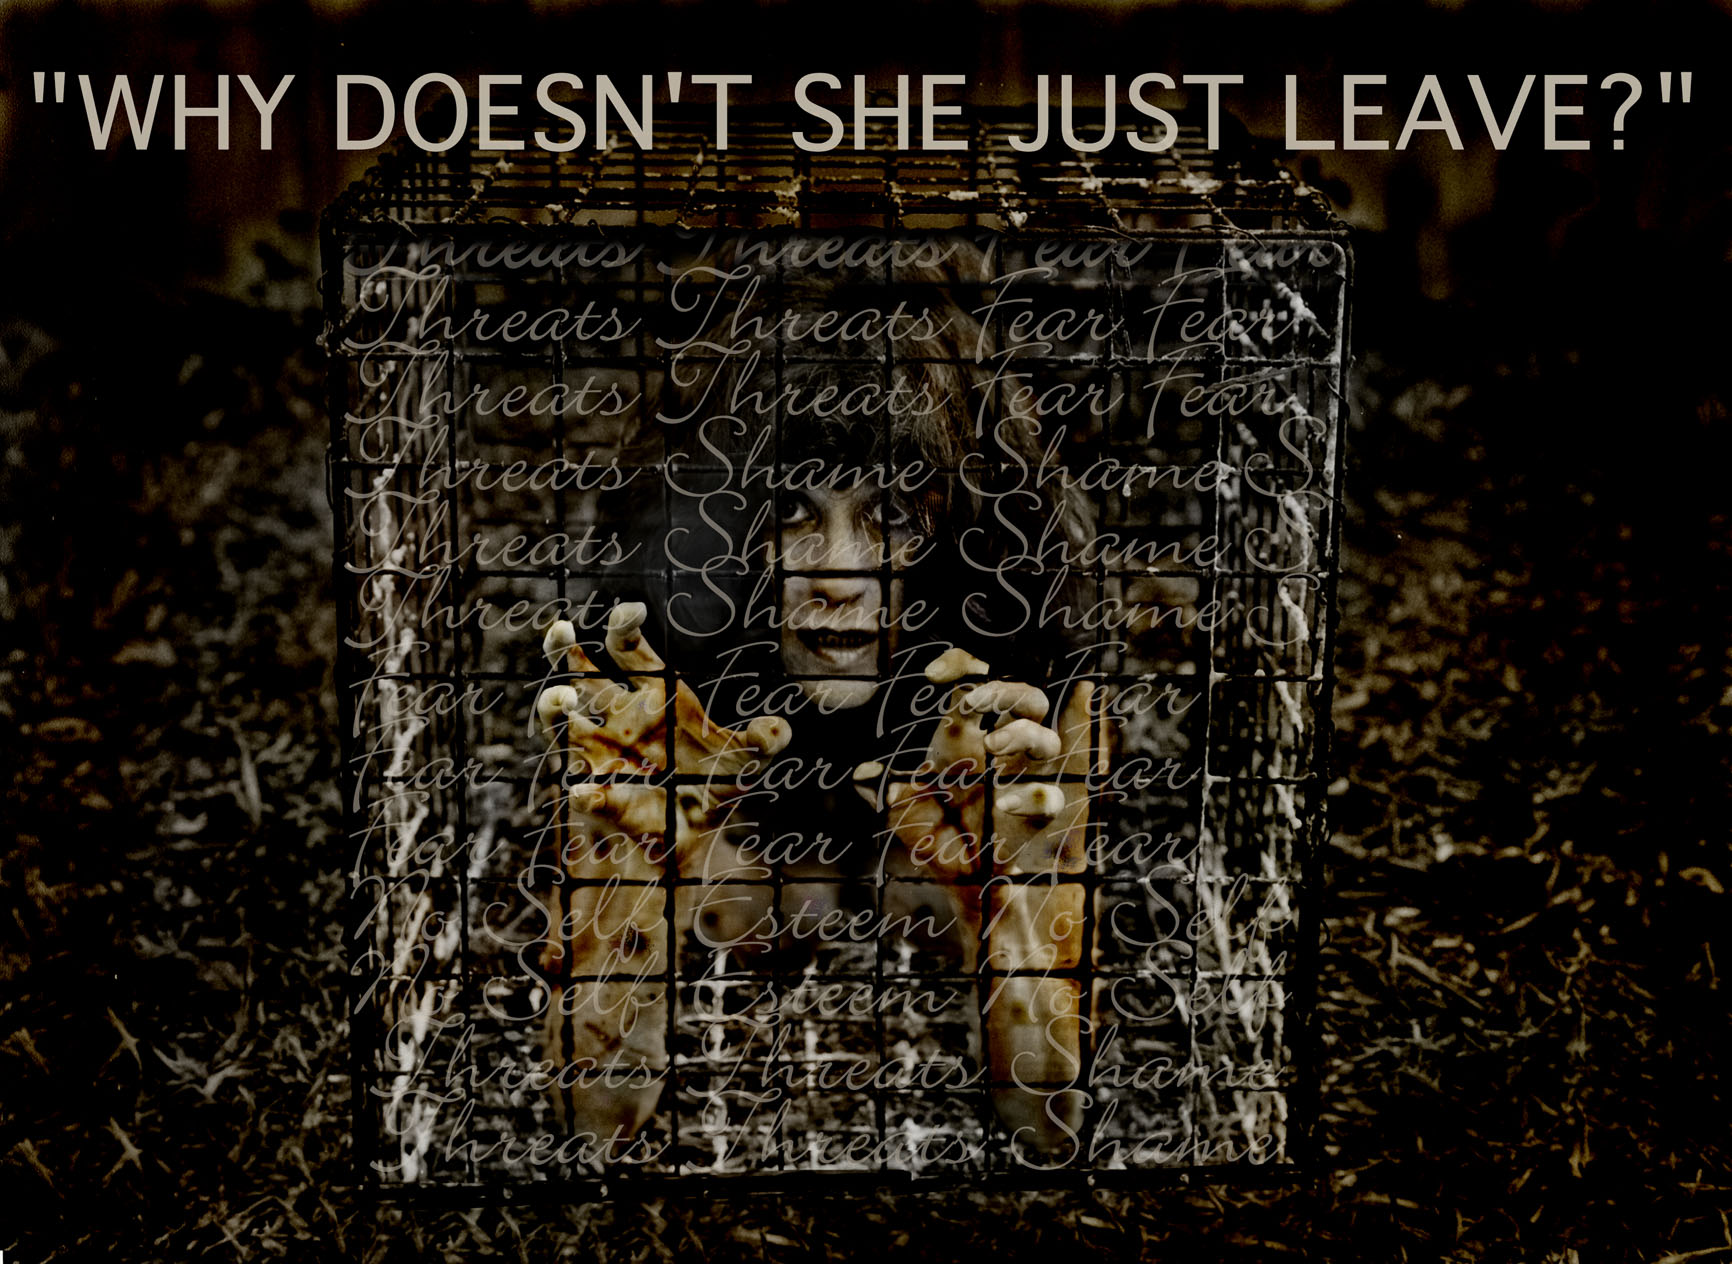 Caged: digital image exploring domestic violence against women and its composite abusive judicial system